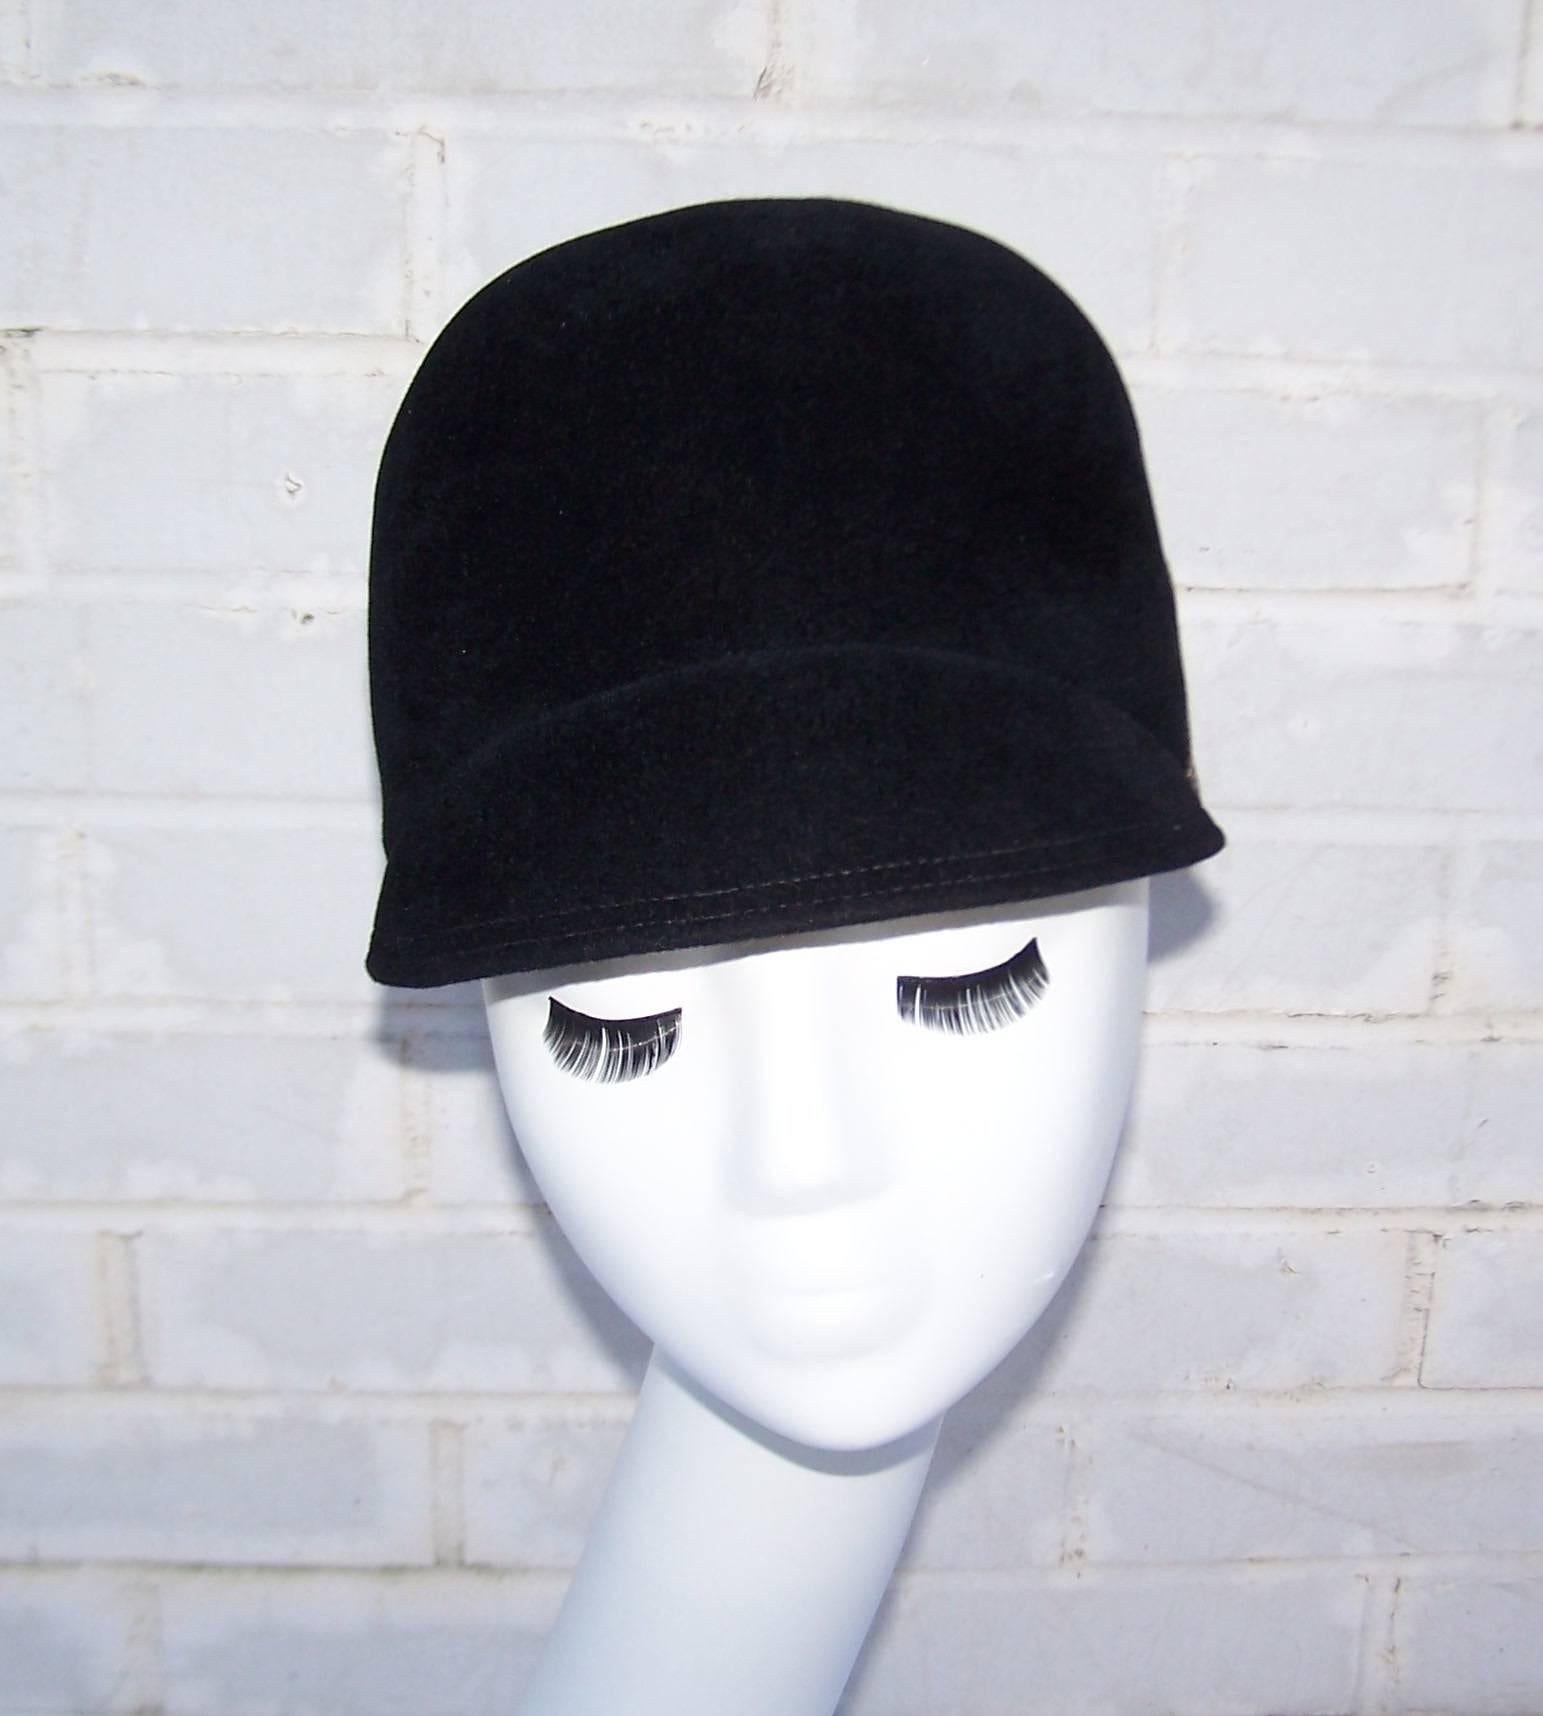 Sporting style meets the mod fashions of the 1960's in this black wool riding cap by Modern Miss.  The crown is decorated with black grosgrain ribbon accented with contrast stitching.  Adorable paired with a period perfect coat and functional for